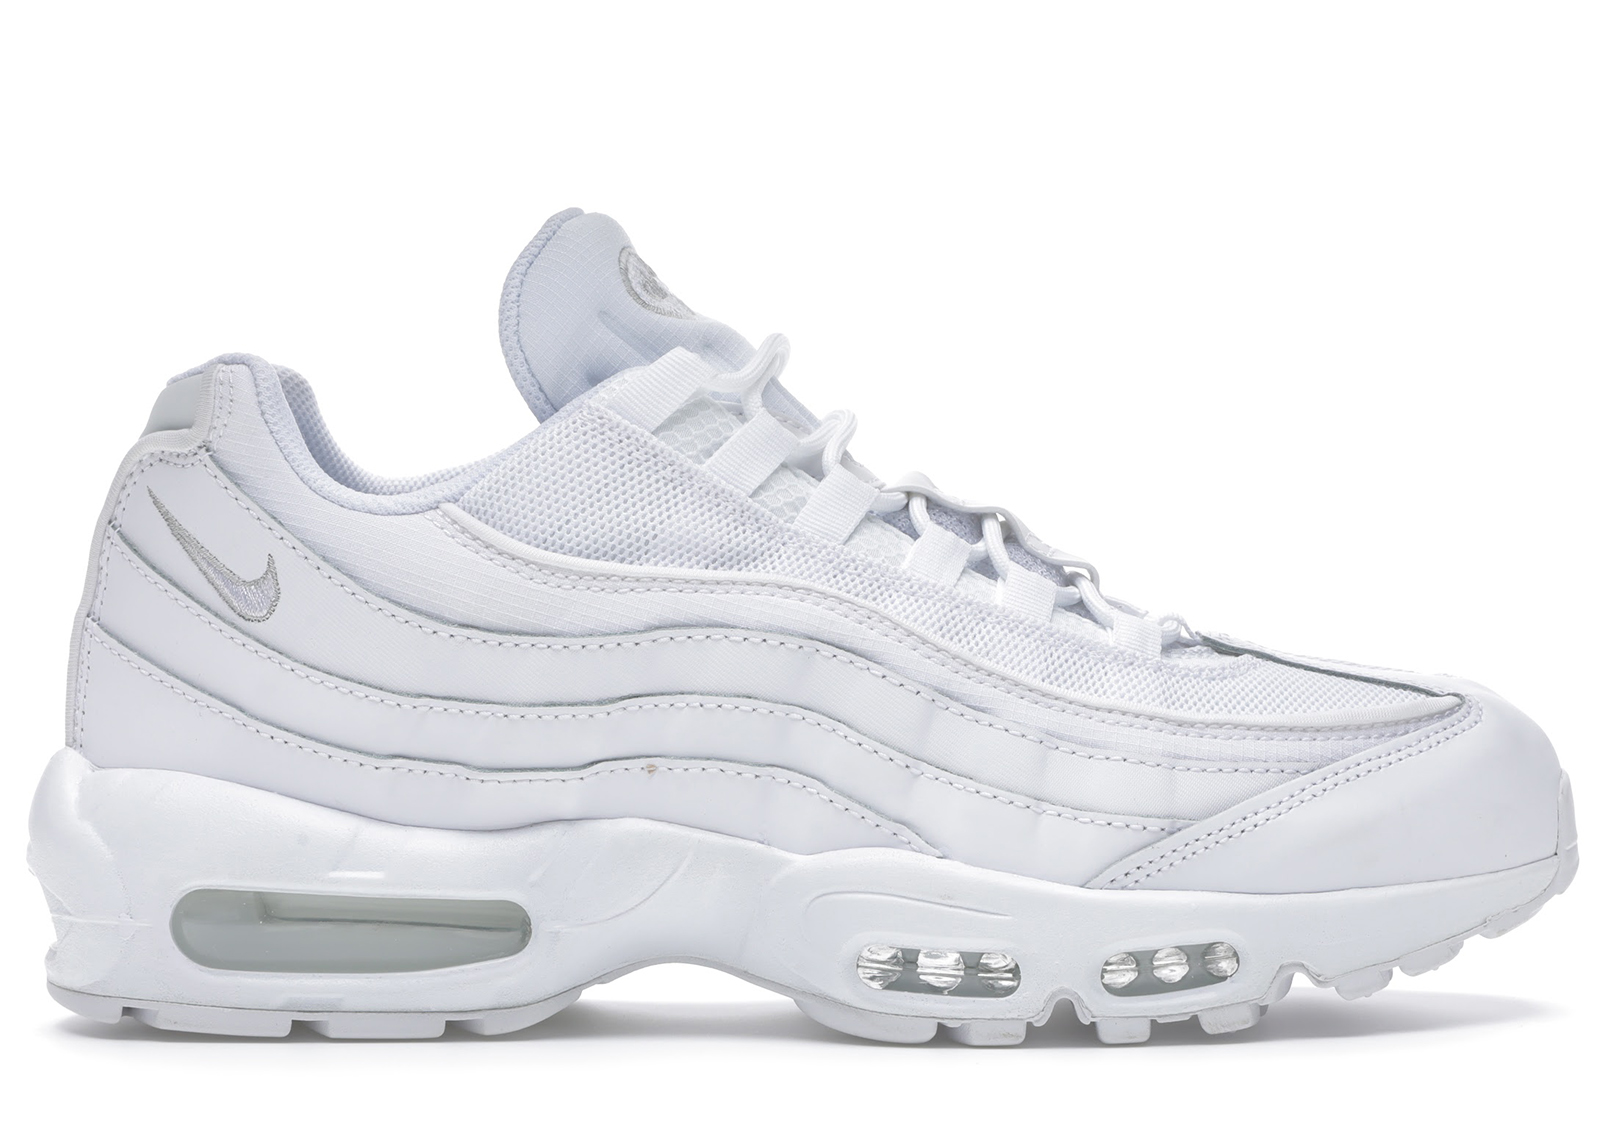 Nike Air Max 95 Shoes - Most Popular